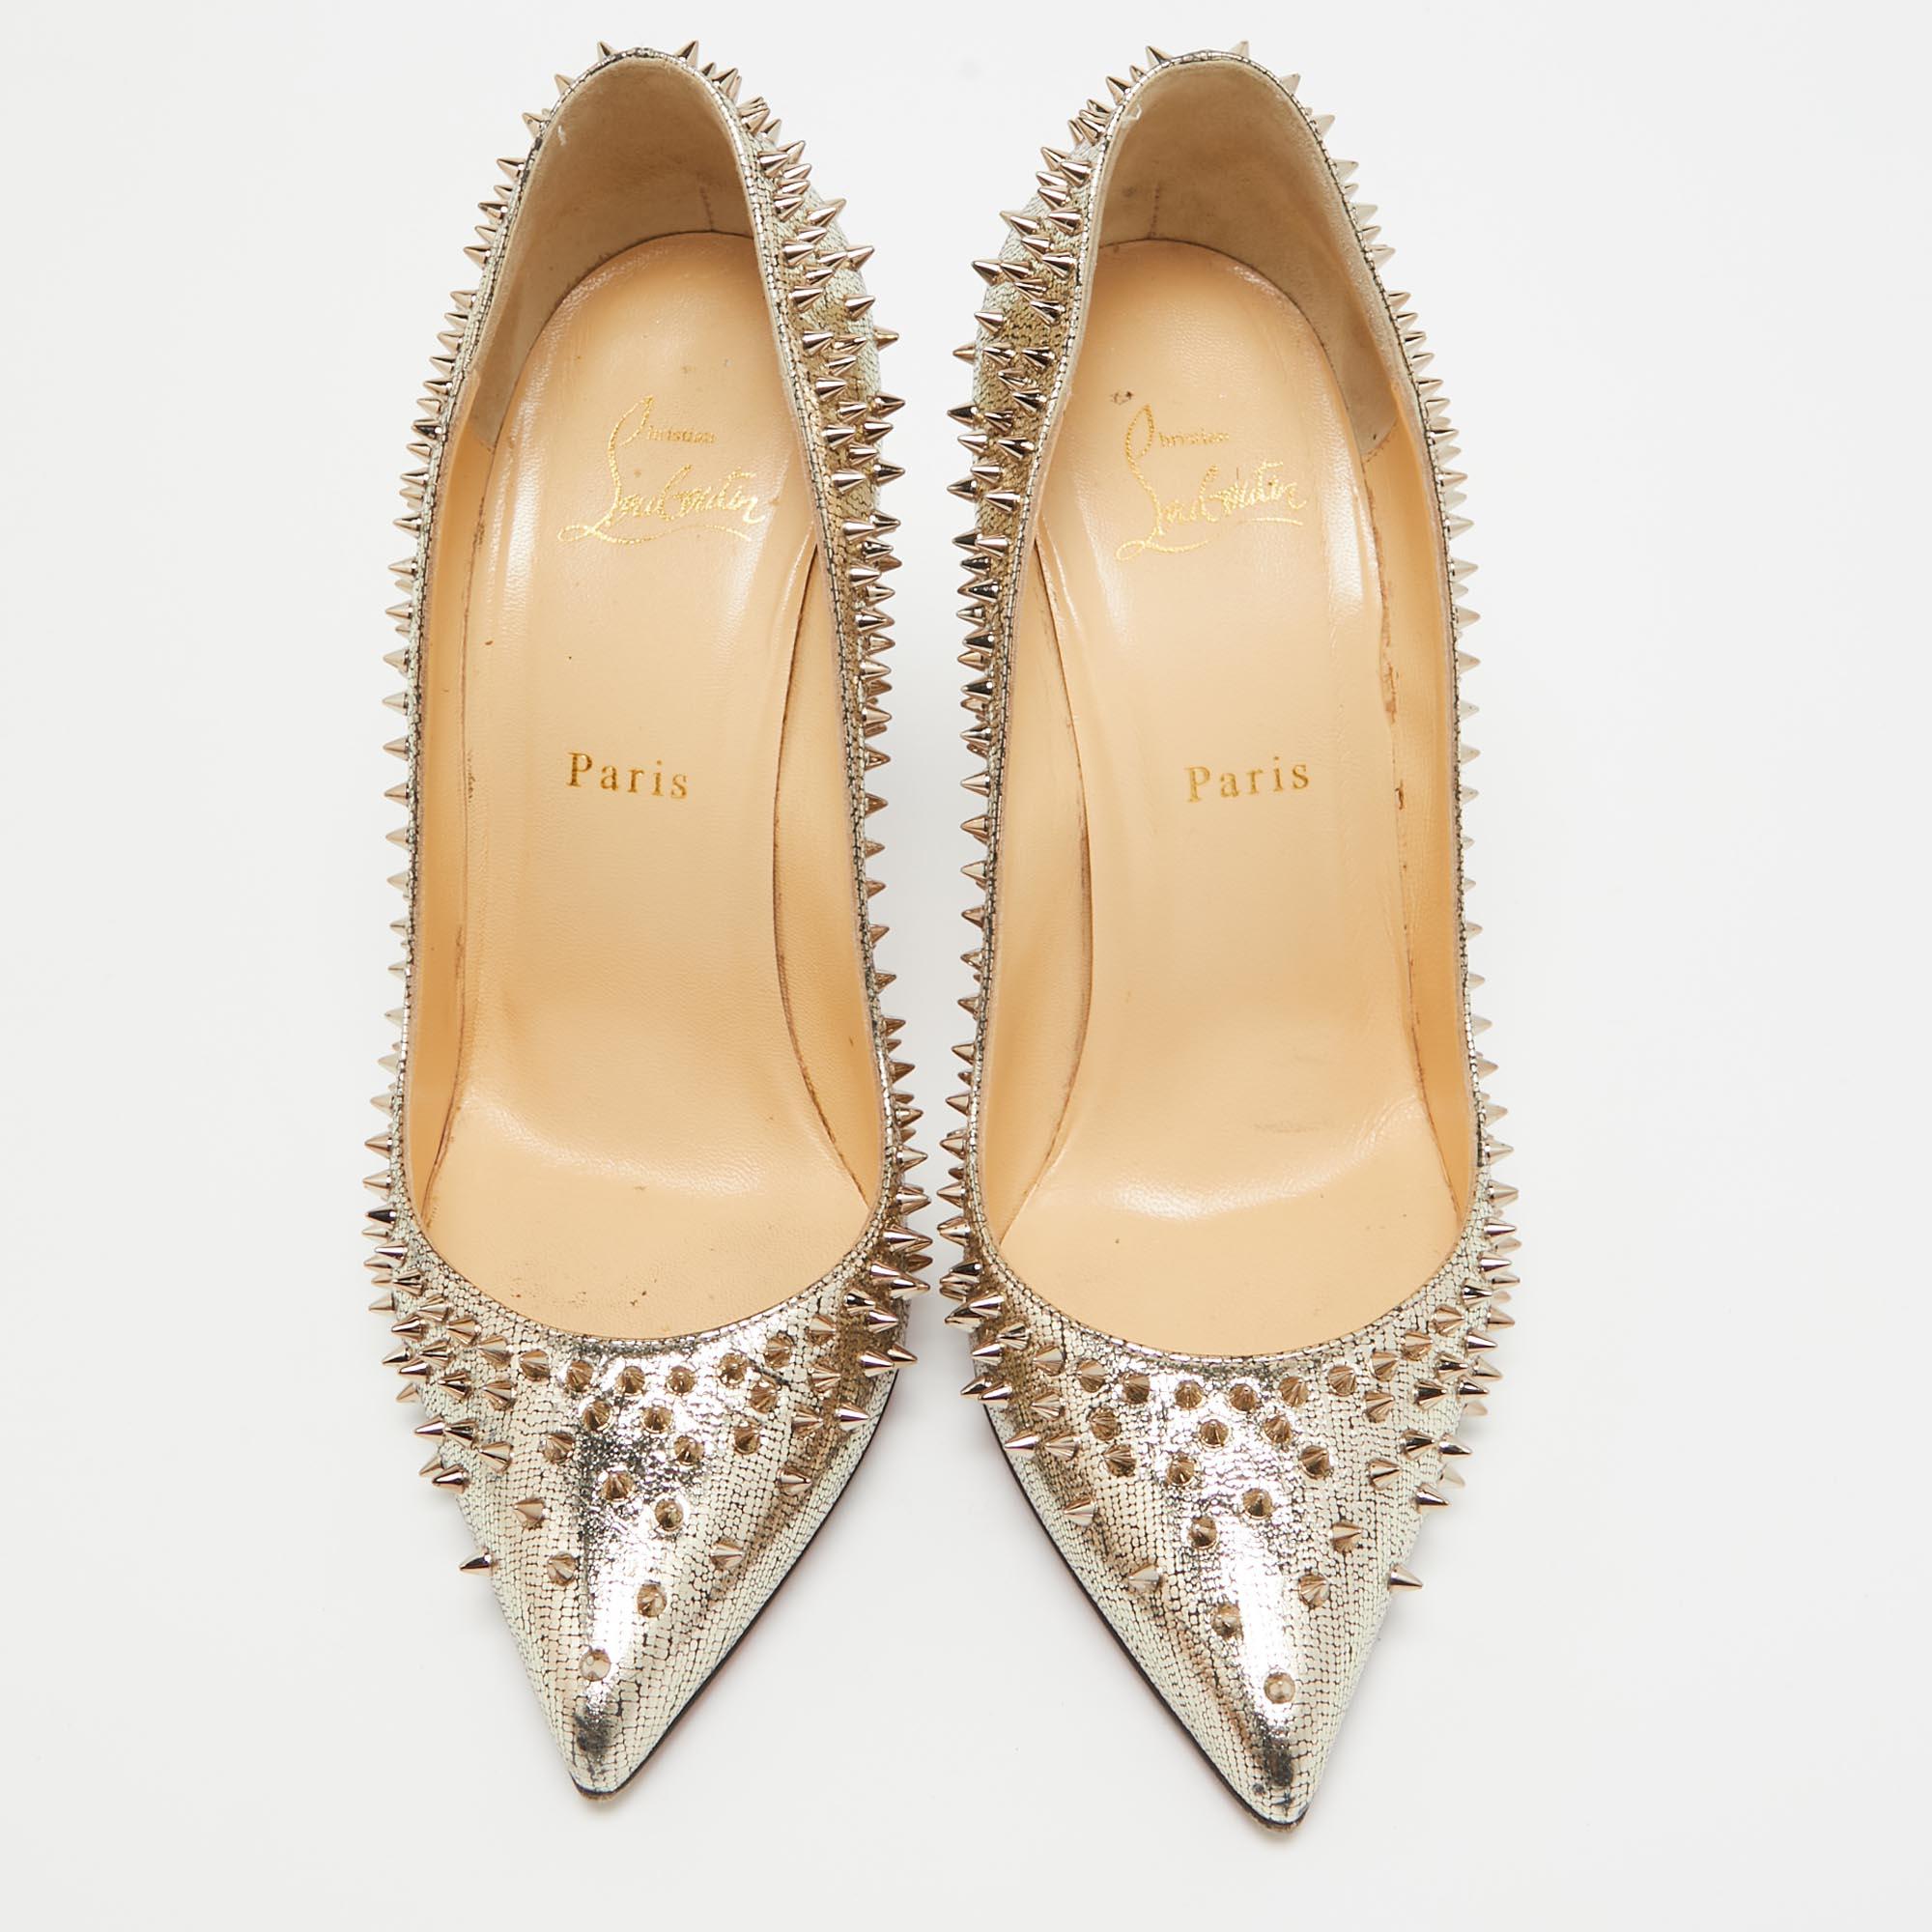 Think of statement shoes and Christian Louboutin is one of the first names that comes to our minds. These exquisite Escarpic pumps from the Parisian label are worth splurging on. Crafted from gold leather, these pumps carry pointed toes and